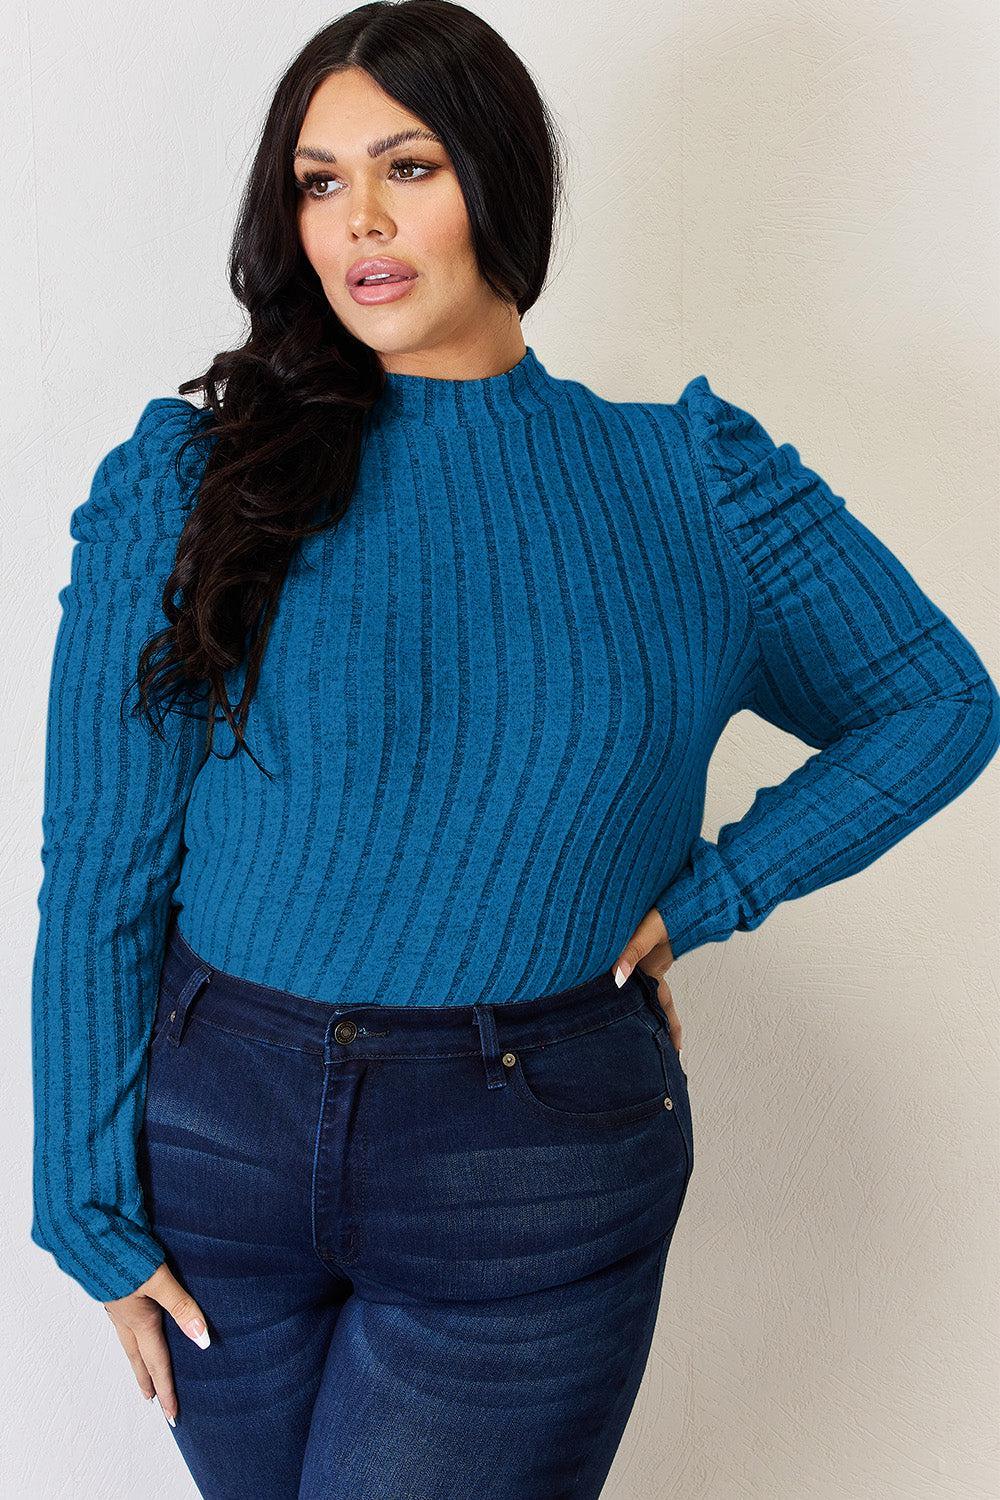 a woman in a blue sweater poses for a picture